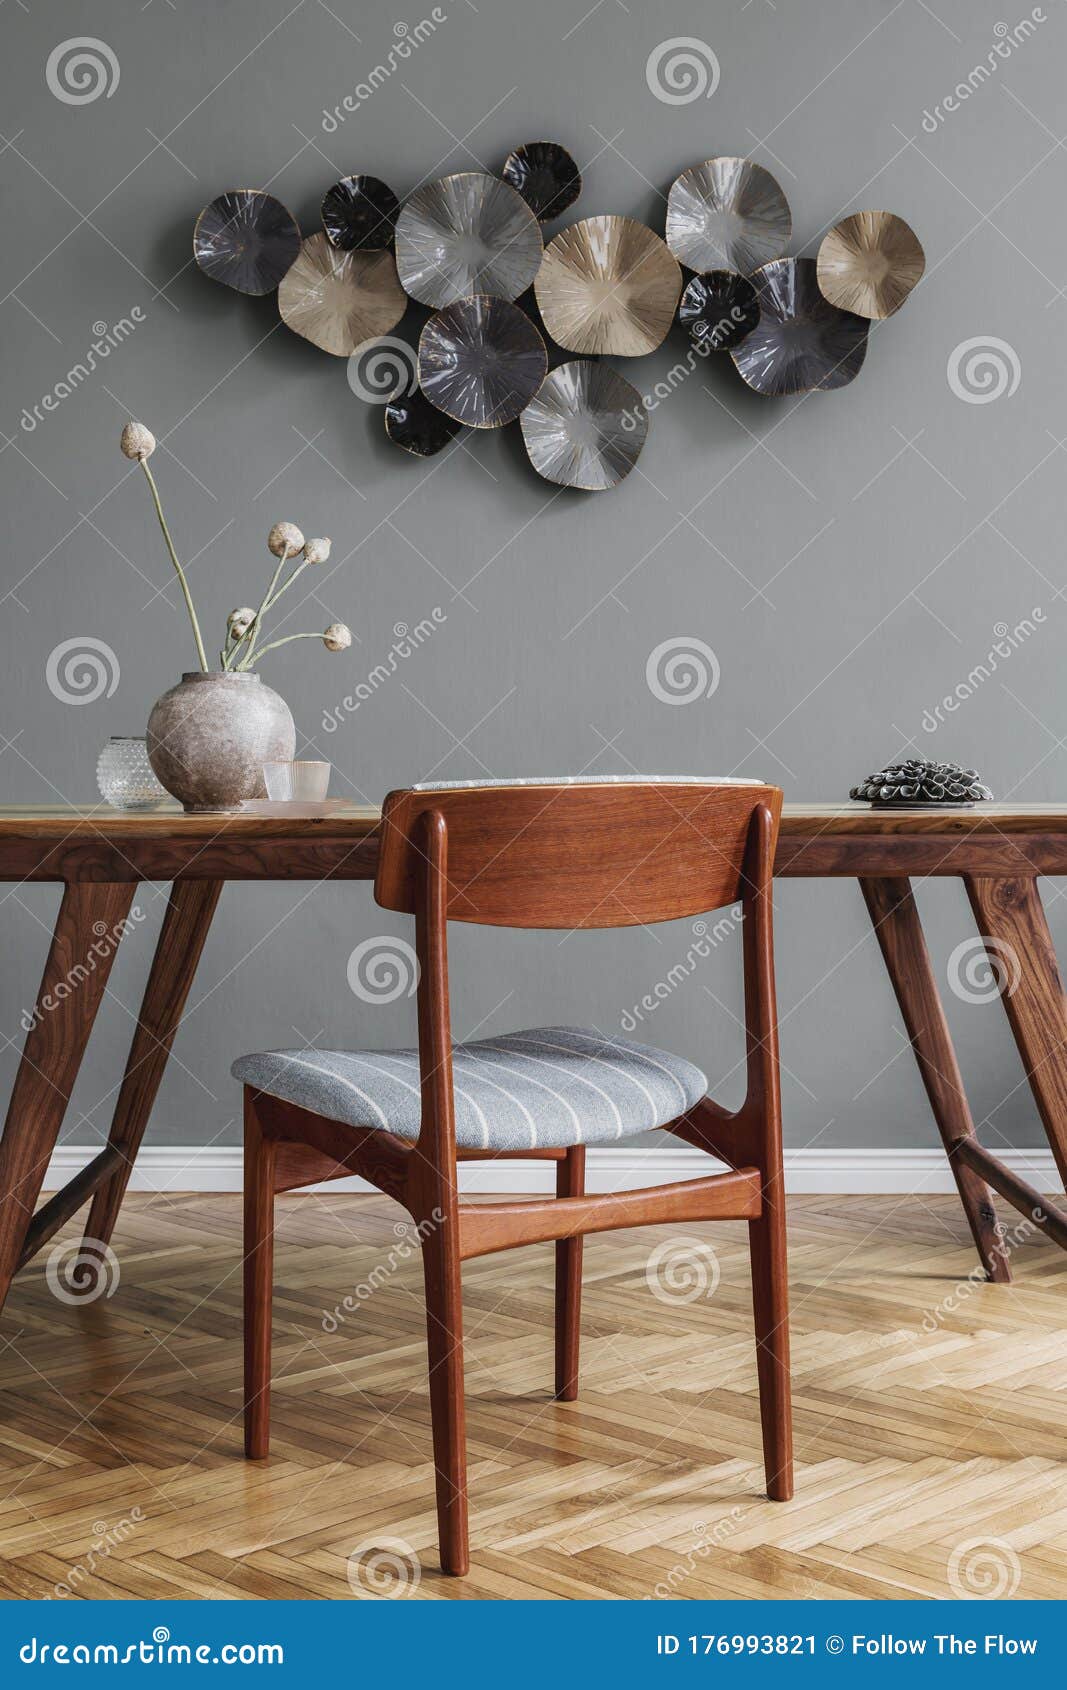 Stylish Dining Room With Wooden Table And Vintage Chair Stock Image Image Of Chairs Contemporary 176993821